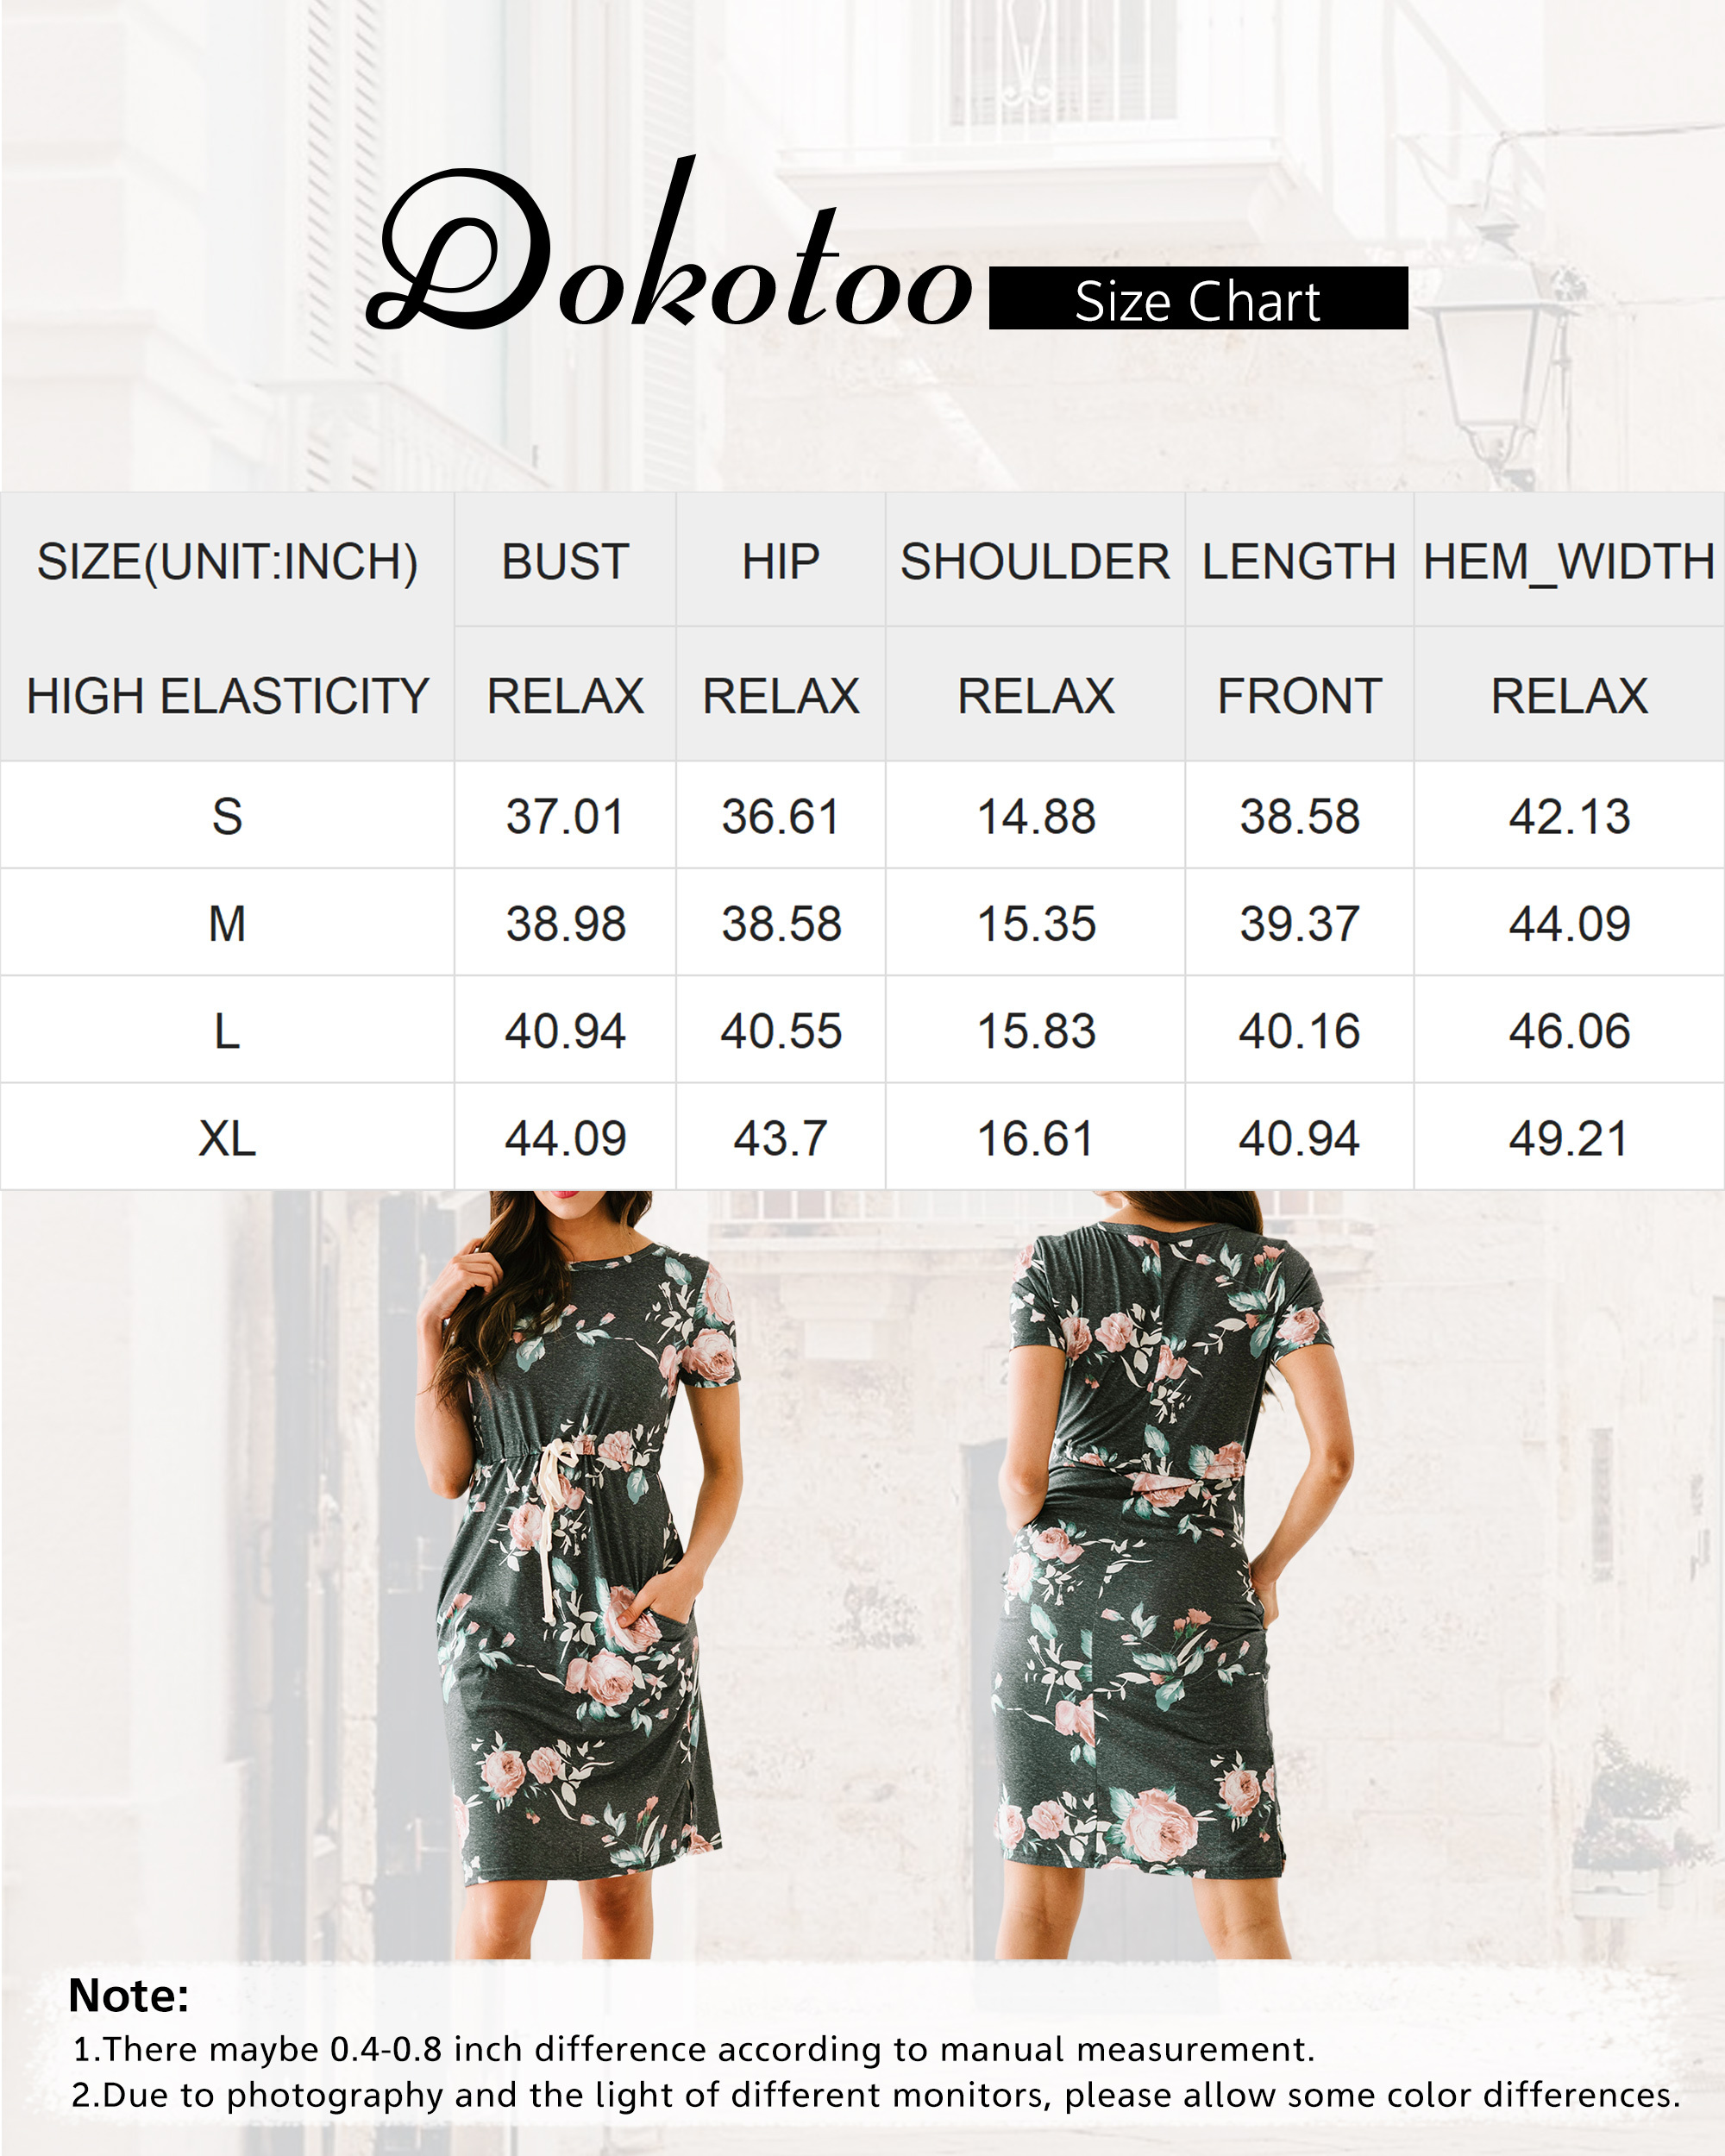 Dokotoo Women's Beach A Line Floral Print Casual Drawstring Waist Side Split T-Shirt Dresses with Pockets Short Sleeve Boat Neck Summer Loose Dress S-XL - image 4 of 7